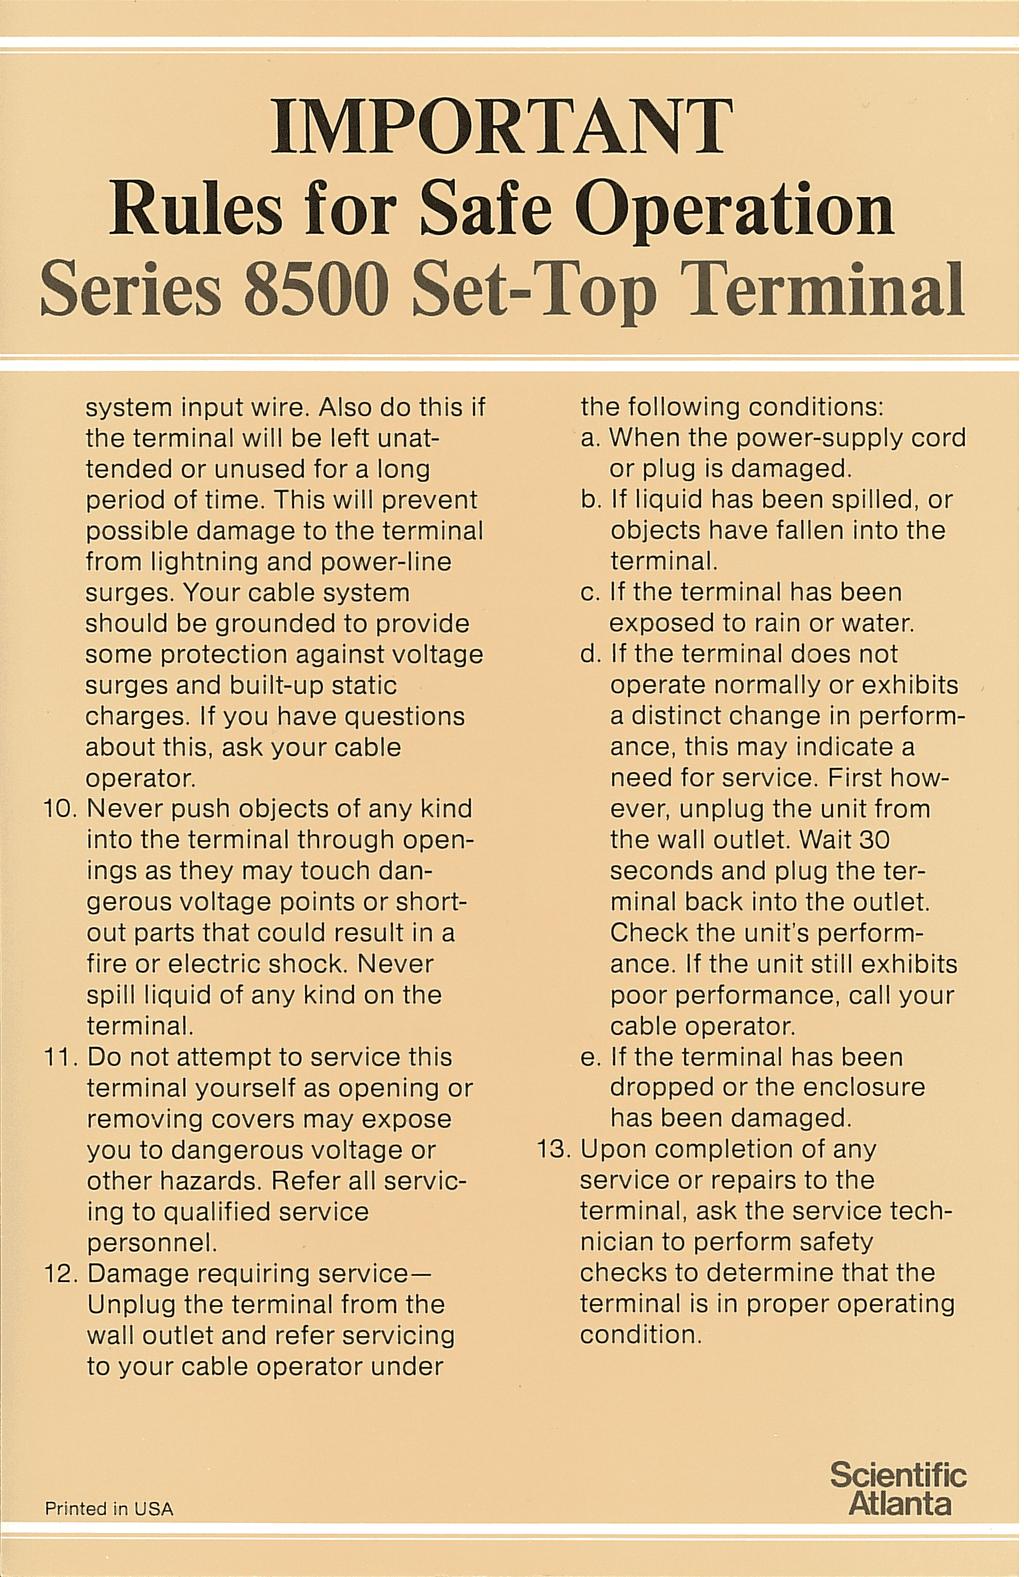 IMPORTANT Rules for Safe Operation Series 8500 Set-Top Terminal system input wire. Also do this if the terminal will be left unattended or unused for a long period of time.